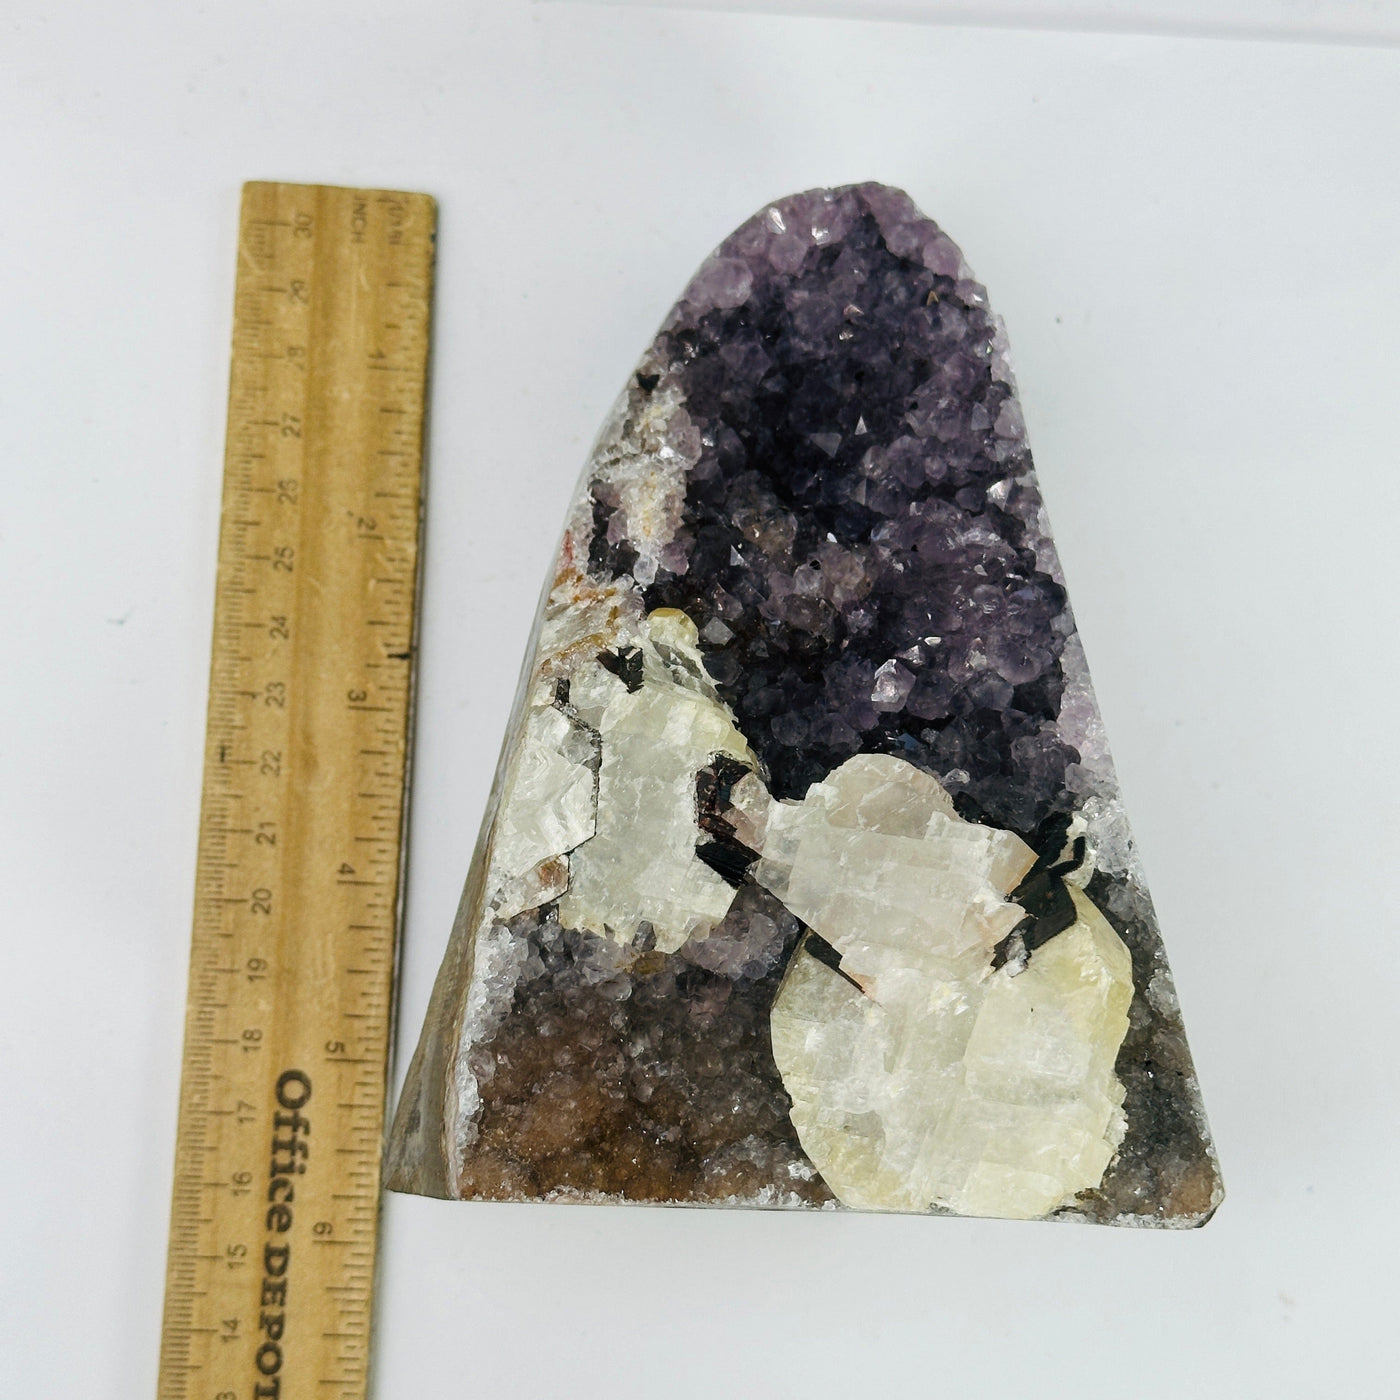 Amethyst cut base next to a ruler for size reference